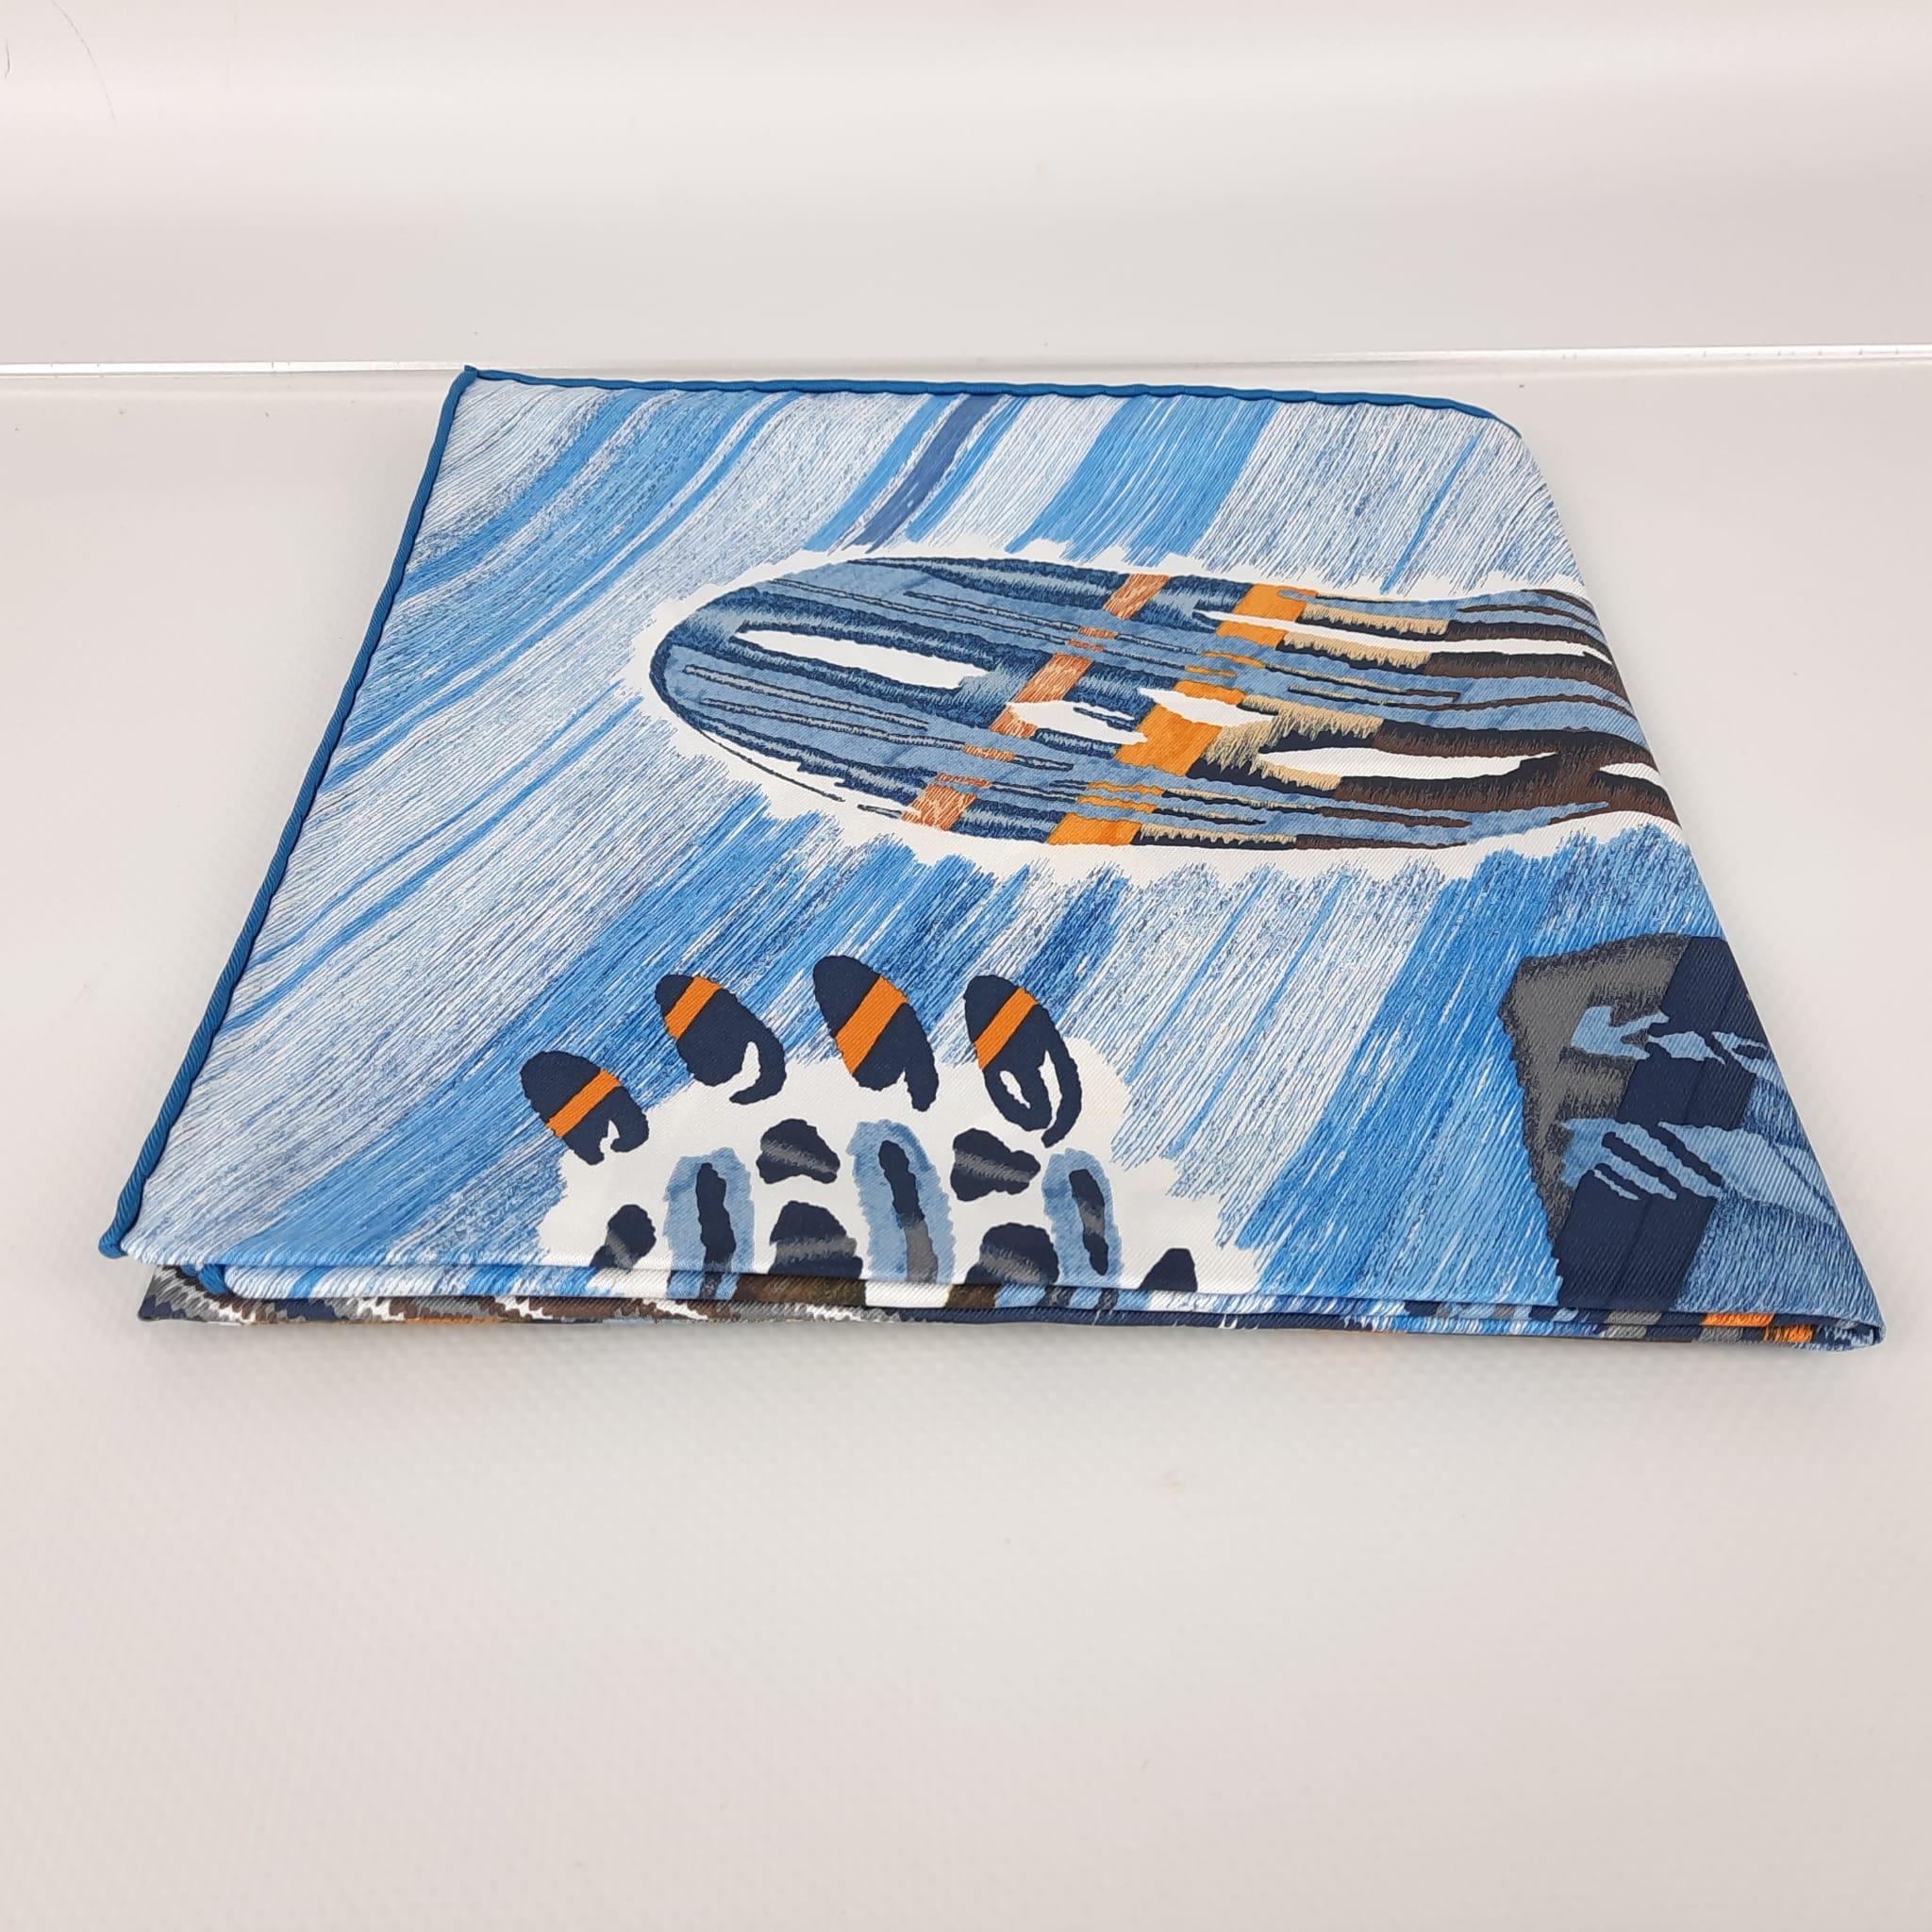 Scarf in silk twill with hand-rolled edges (100% silk).
Designed by Florence Manlik